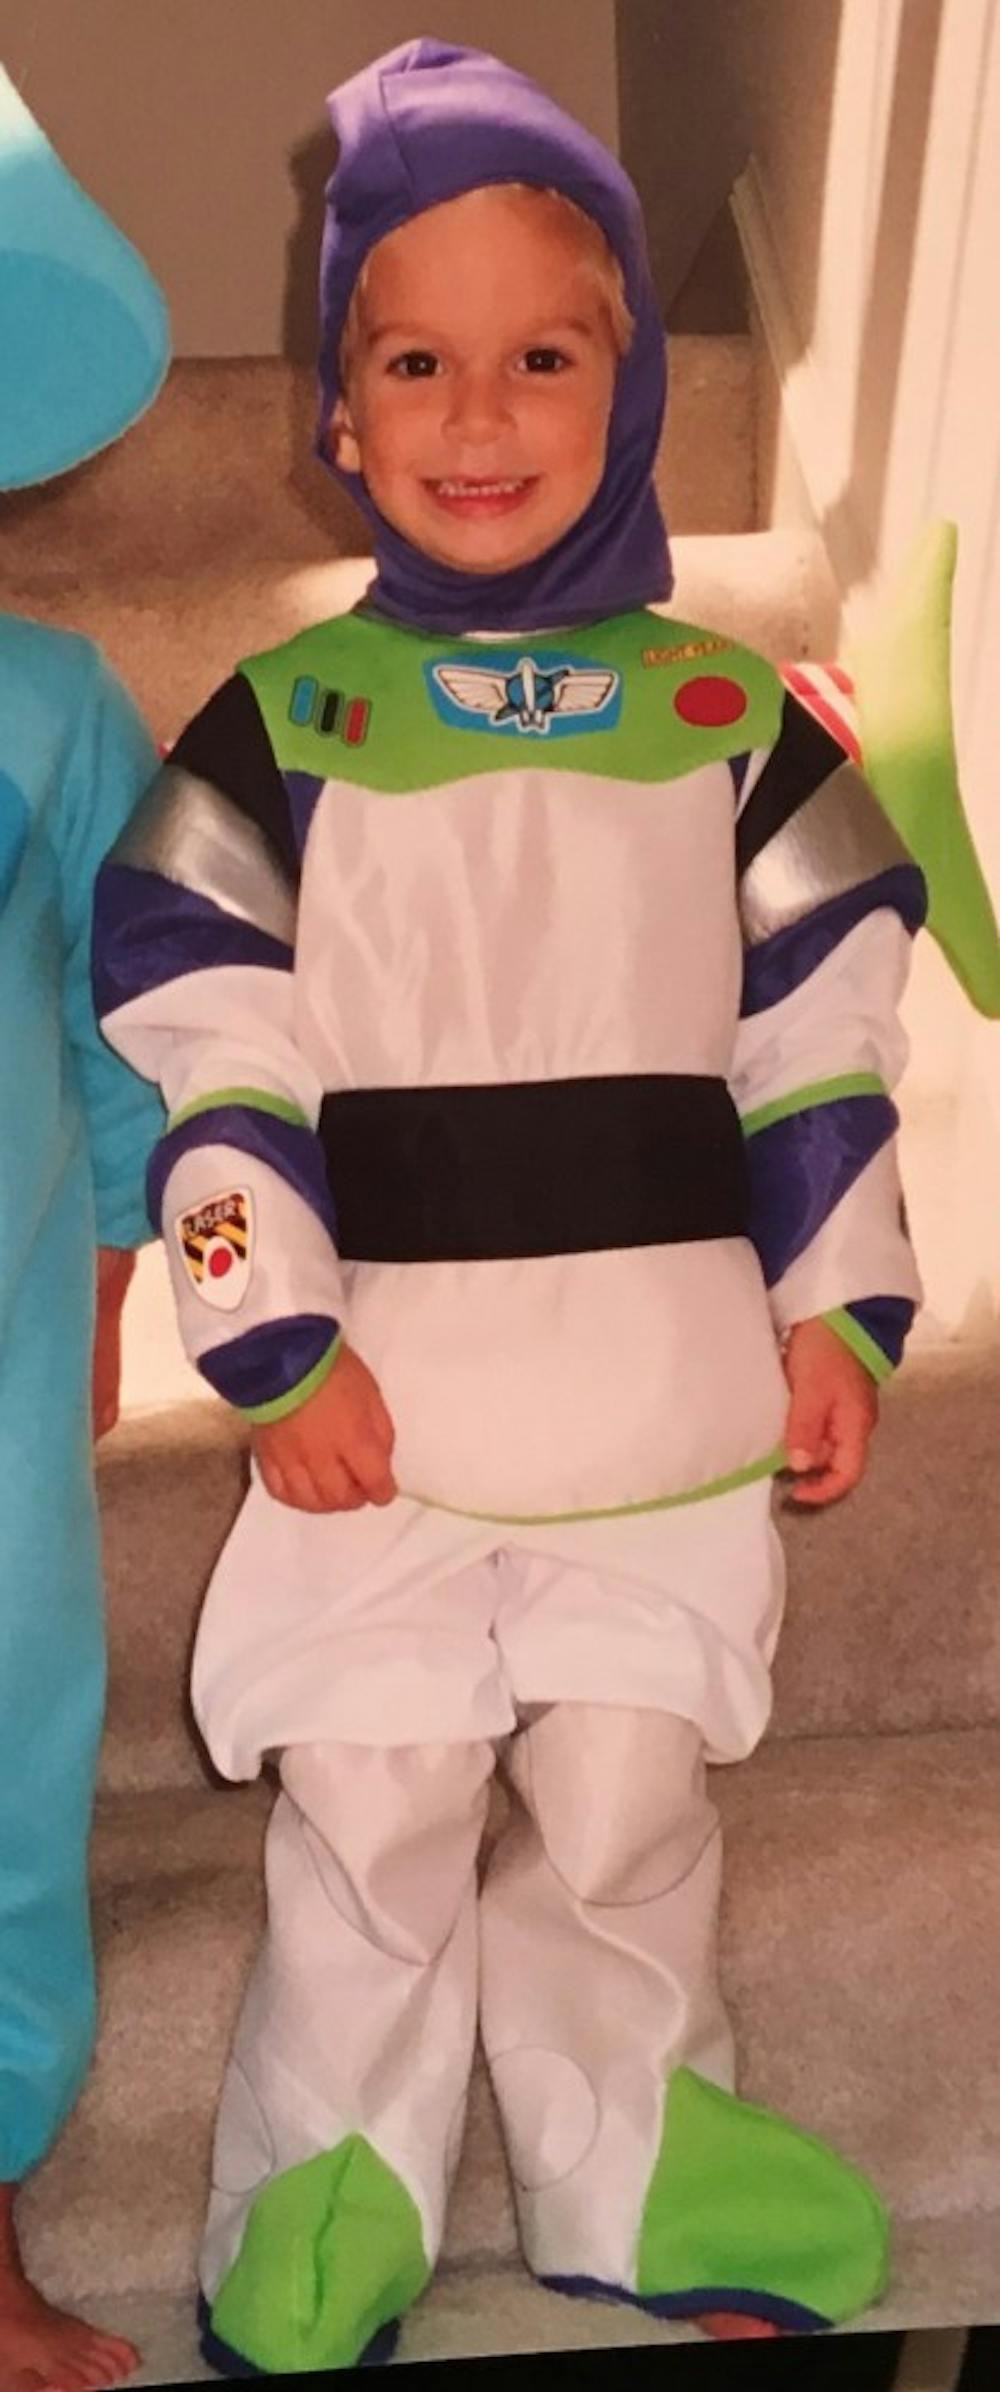 <p>Jack Skahan dressed up as Buzz Lightyear as a child. Photo courtesy of Karen Skahan.</p>